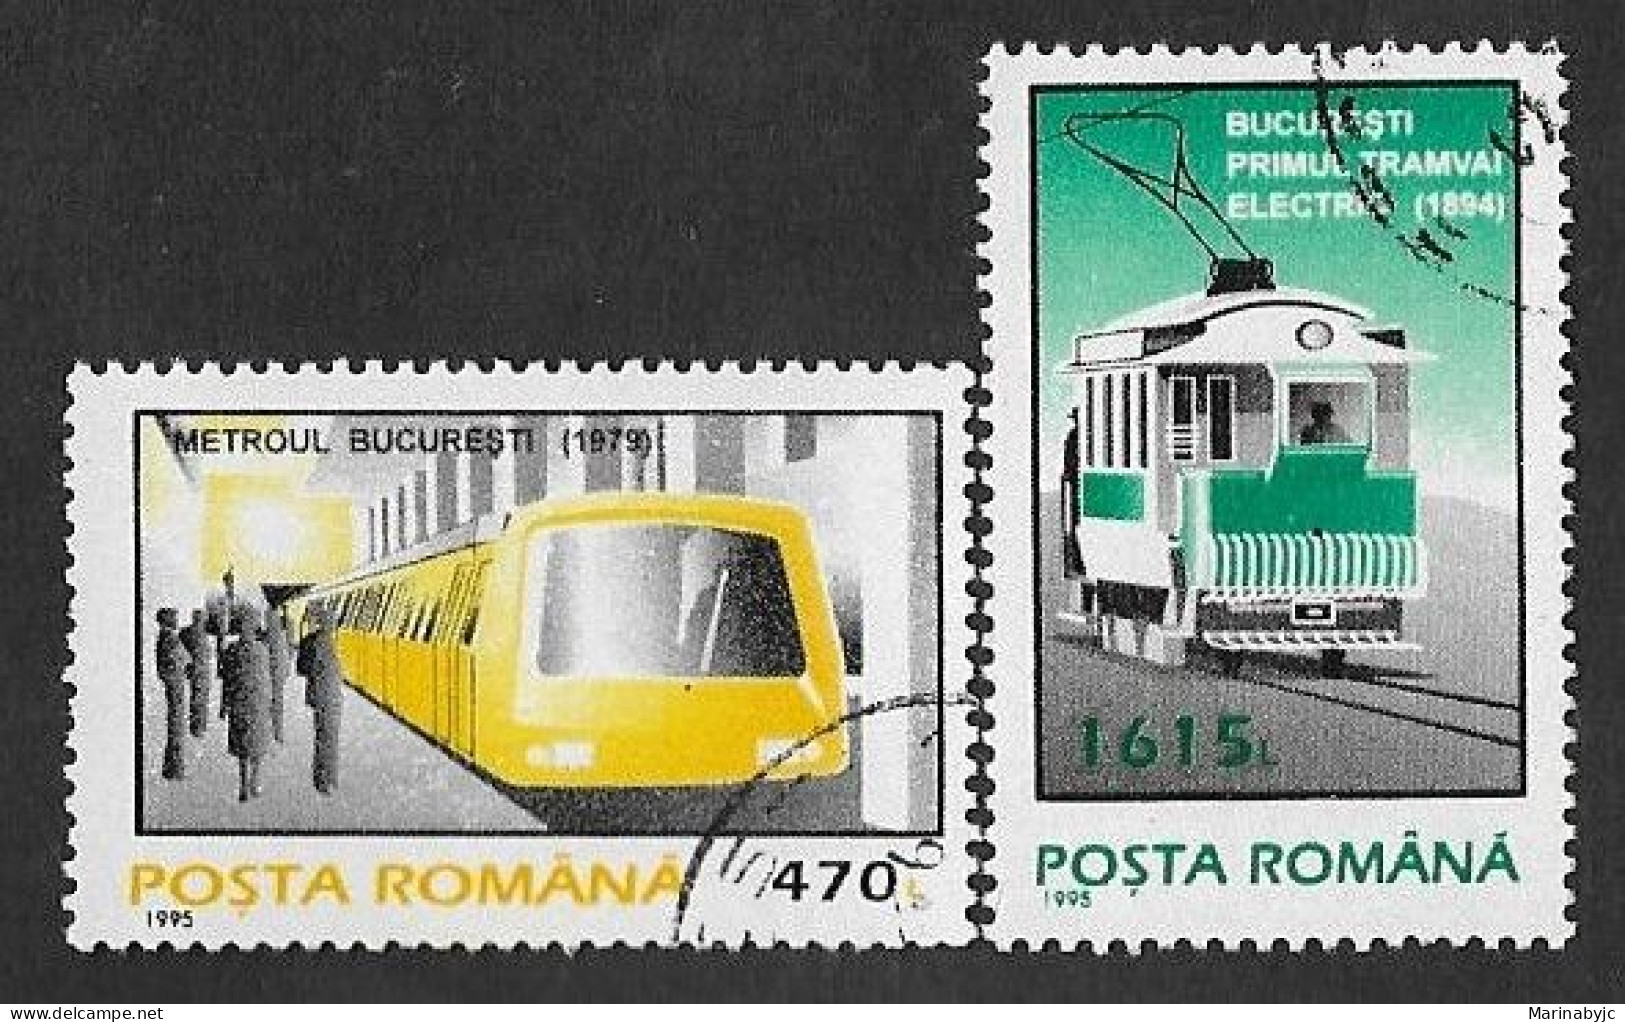 SE)1995 ROMANIA, FROM THE TRAINS SERIES, THE BUCHAREST METRO, 1ST ELECTRIC TRAIN, 2 CTO STAMPS - Gebruikt